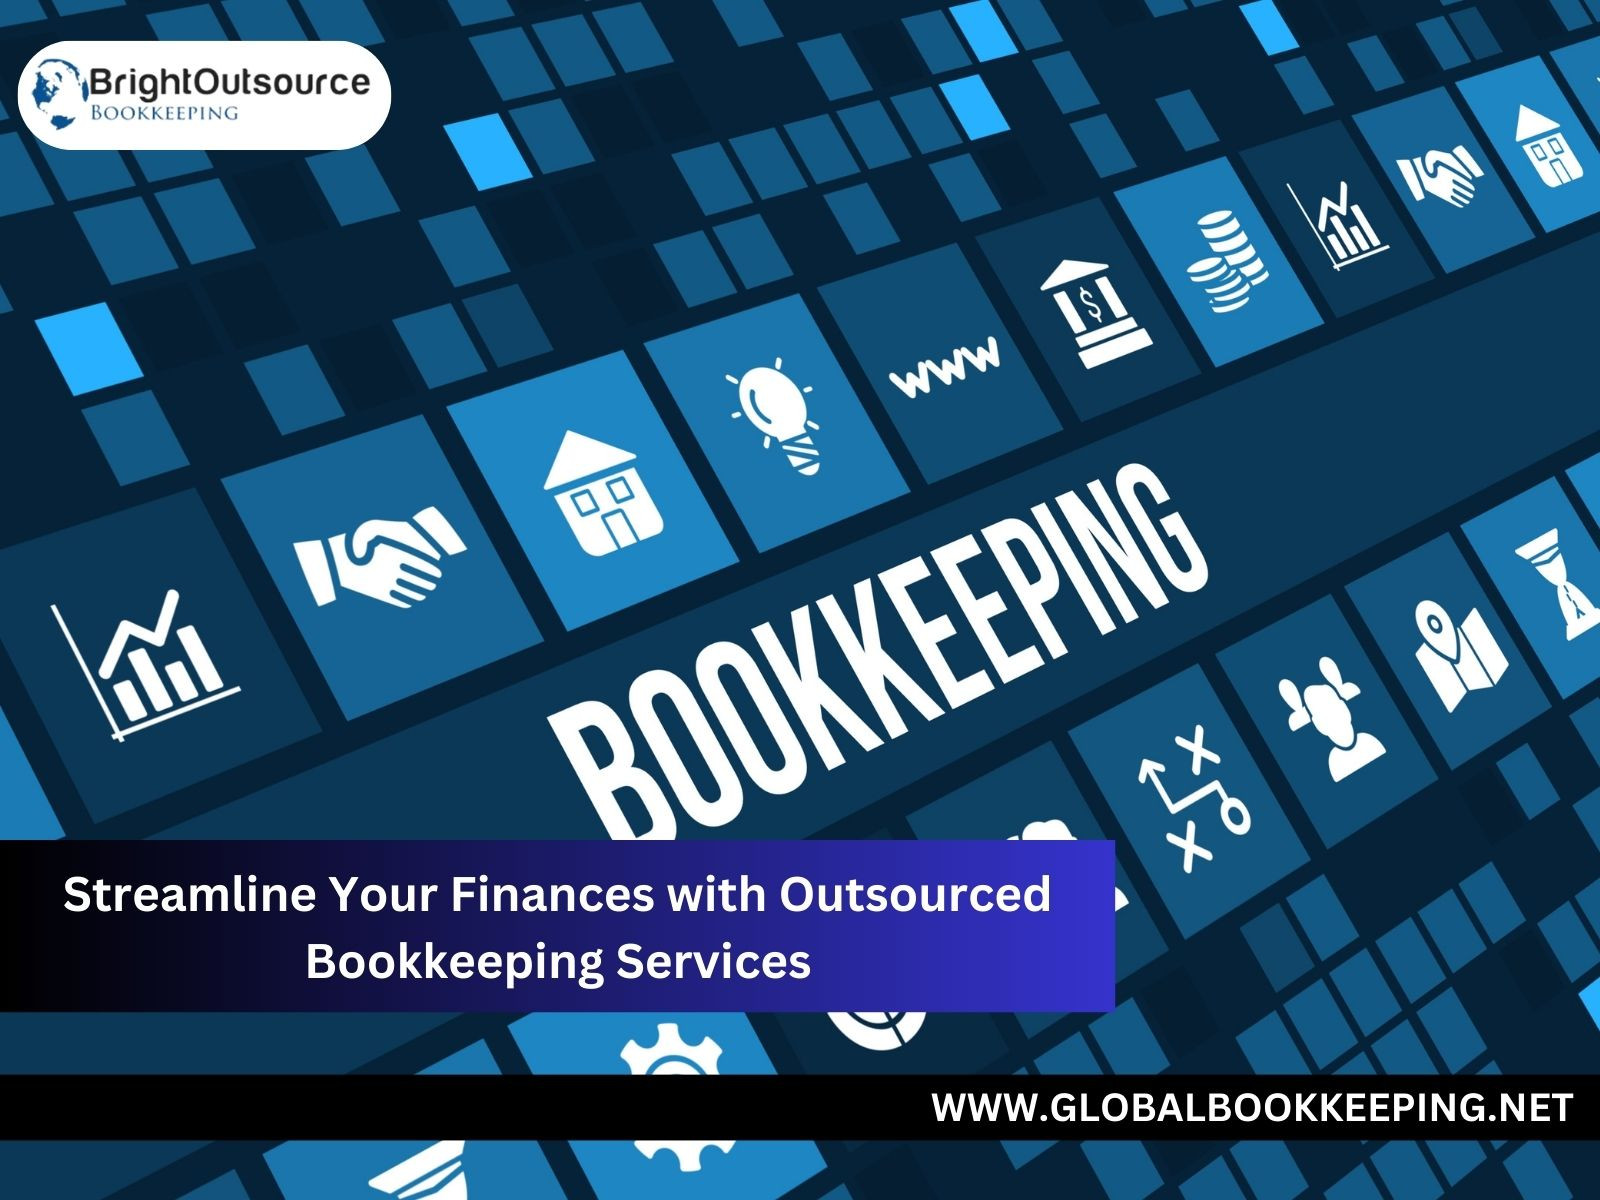 Streamline Your Finances with Outsourced Bookkeeping Services